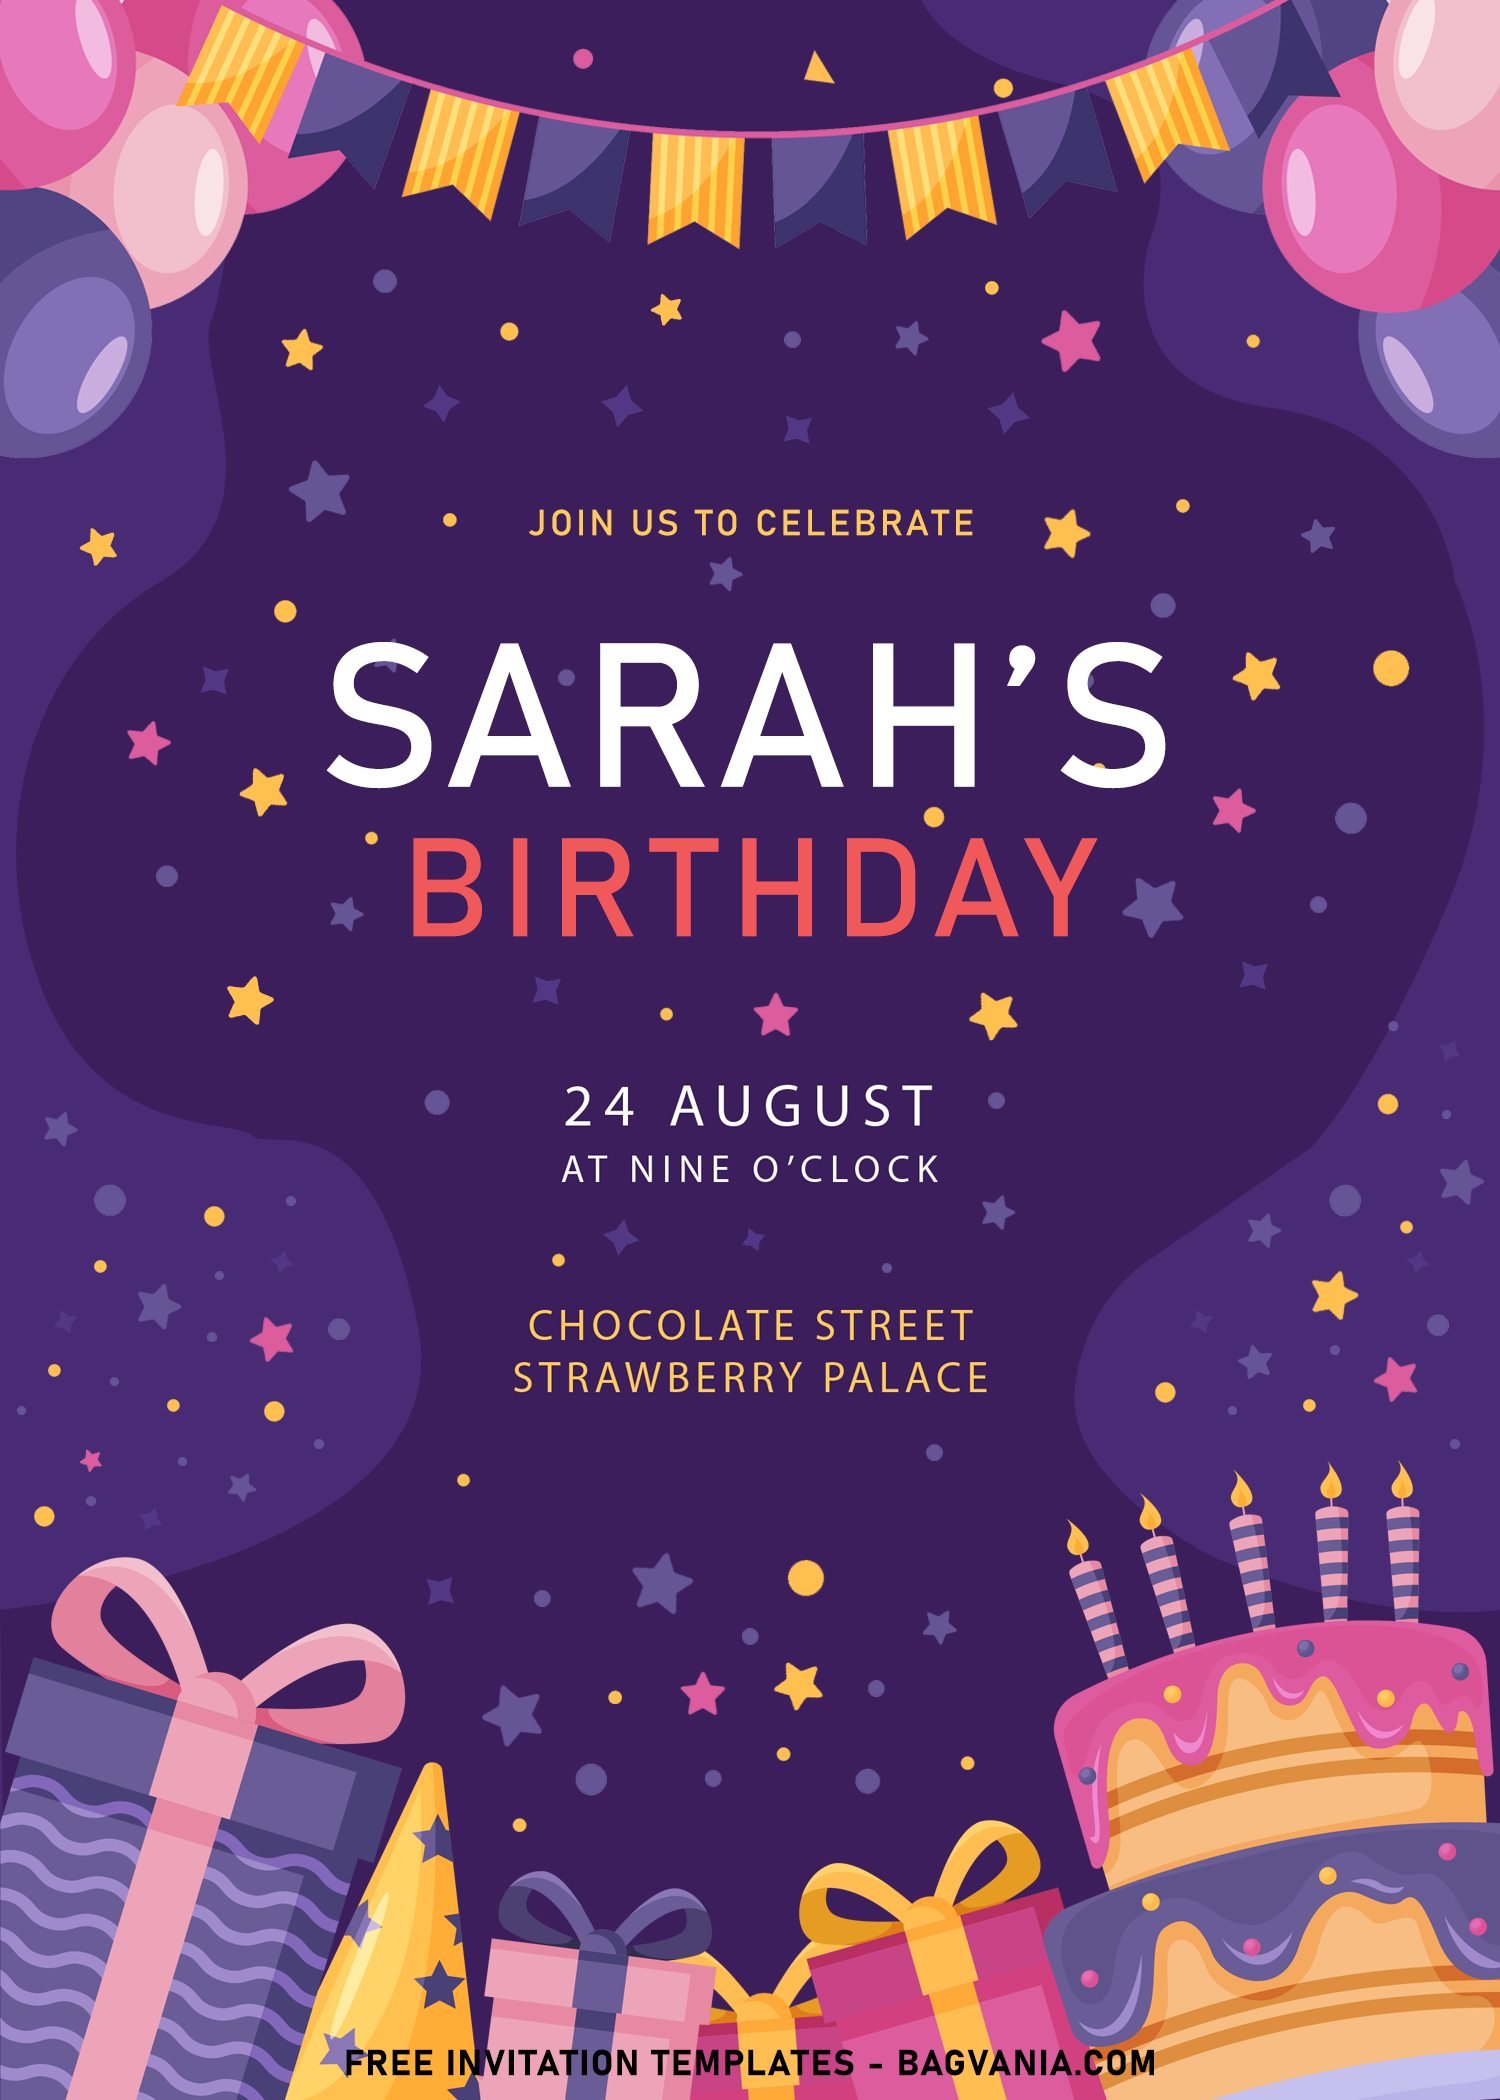 7 Fun Birthday Invitation Templates For Your Kids Birthday Party